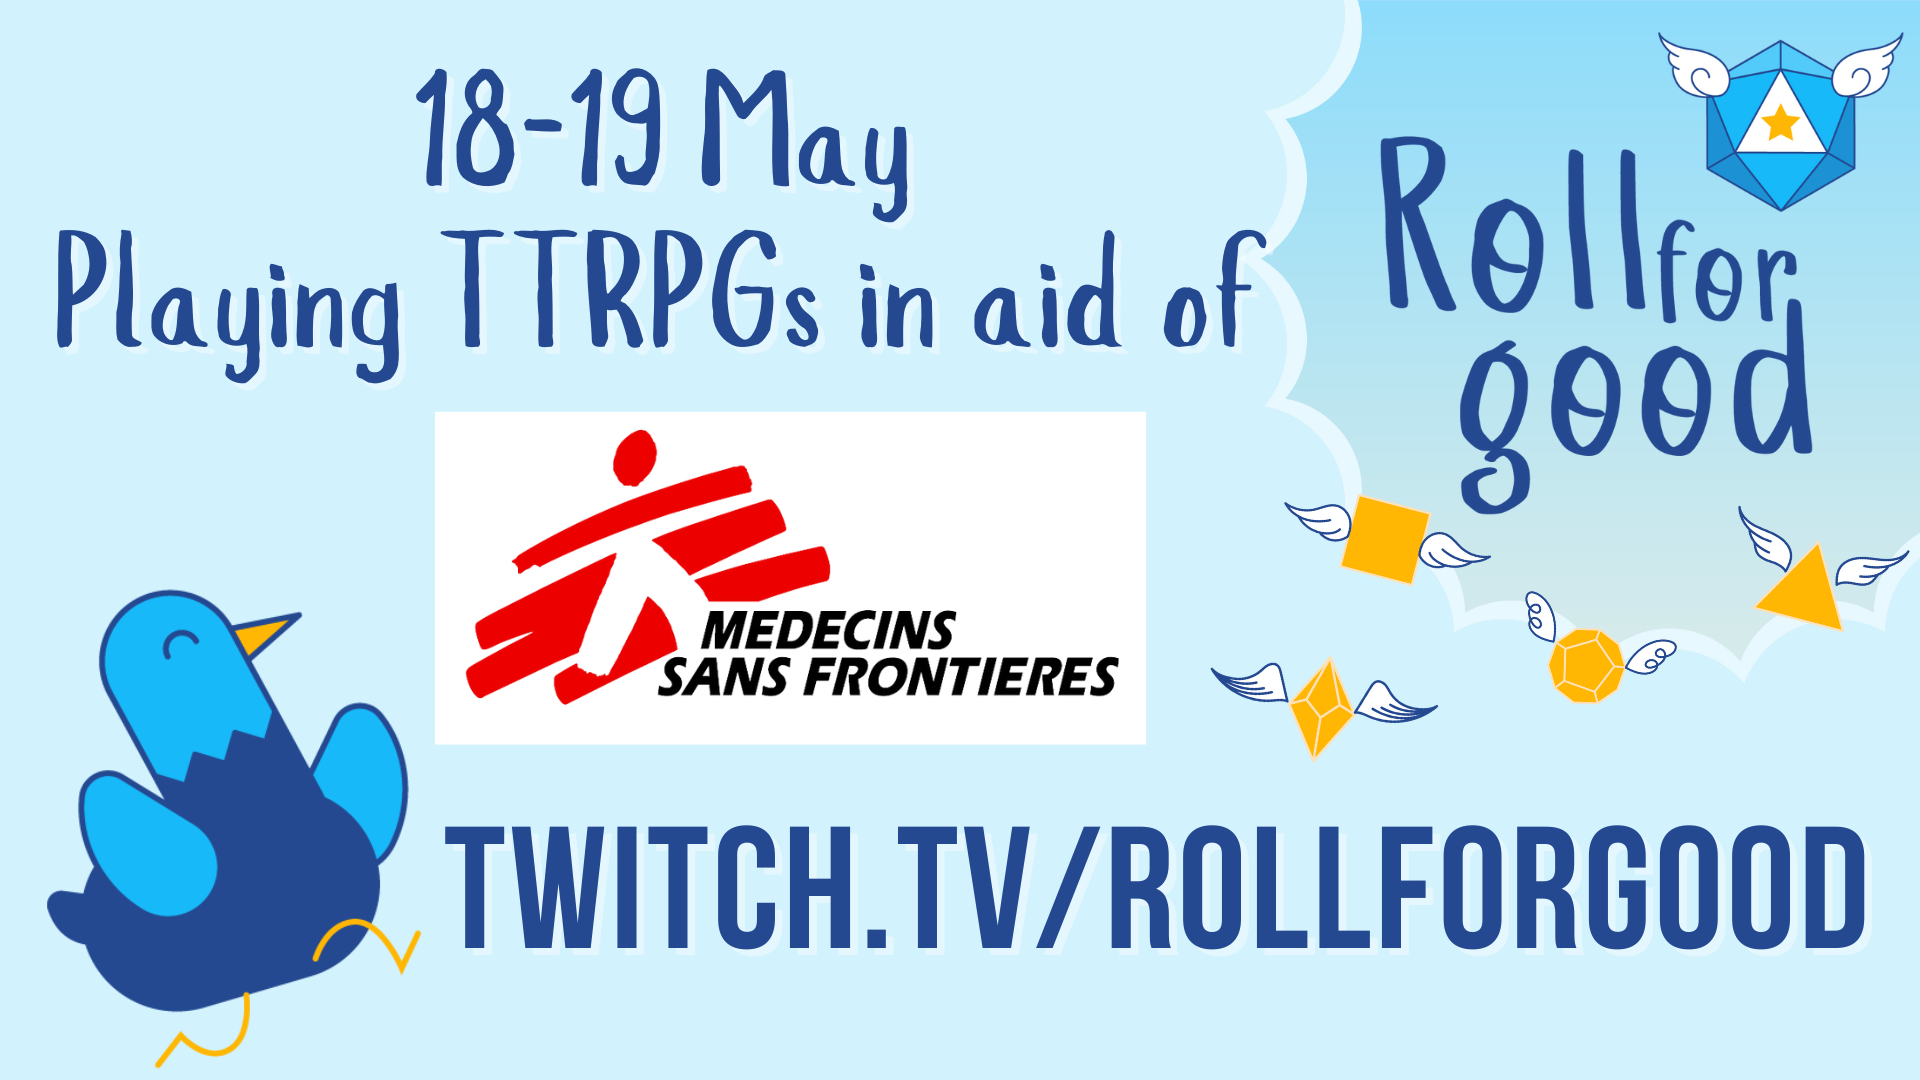 Roll For Good: TTRPG Charity Event supporting Doctors Without Borders 18-19 May